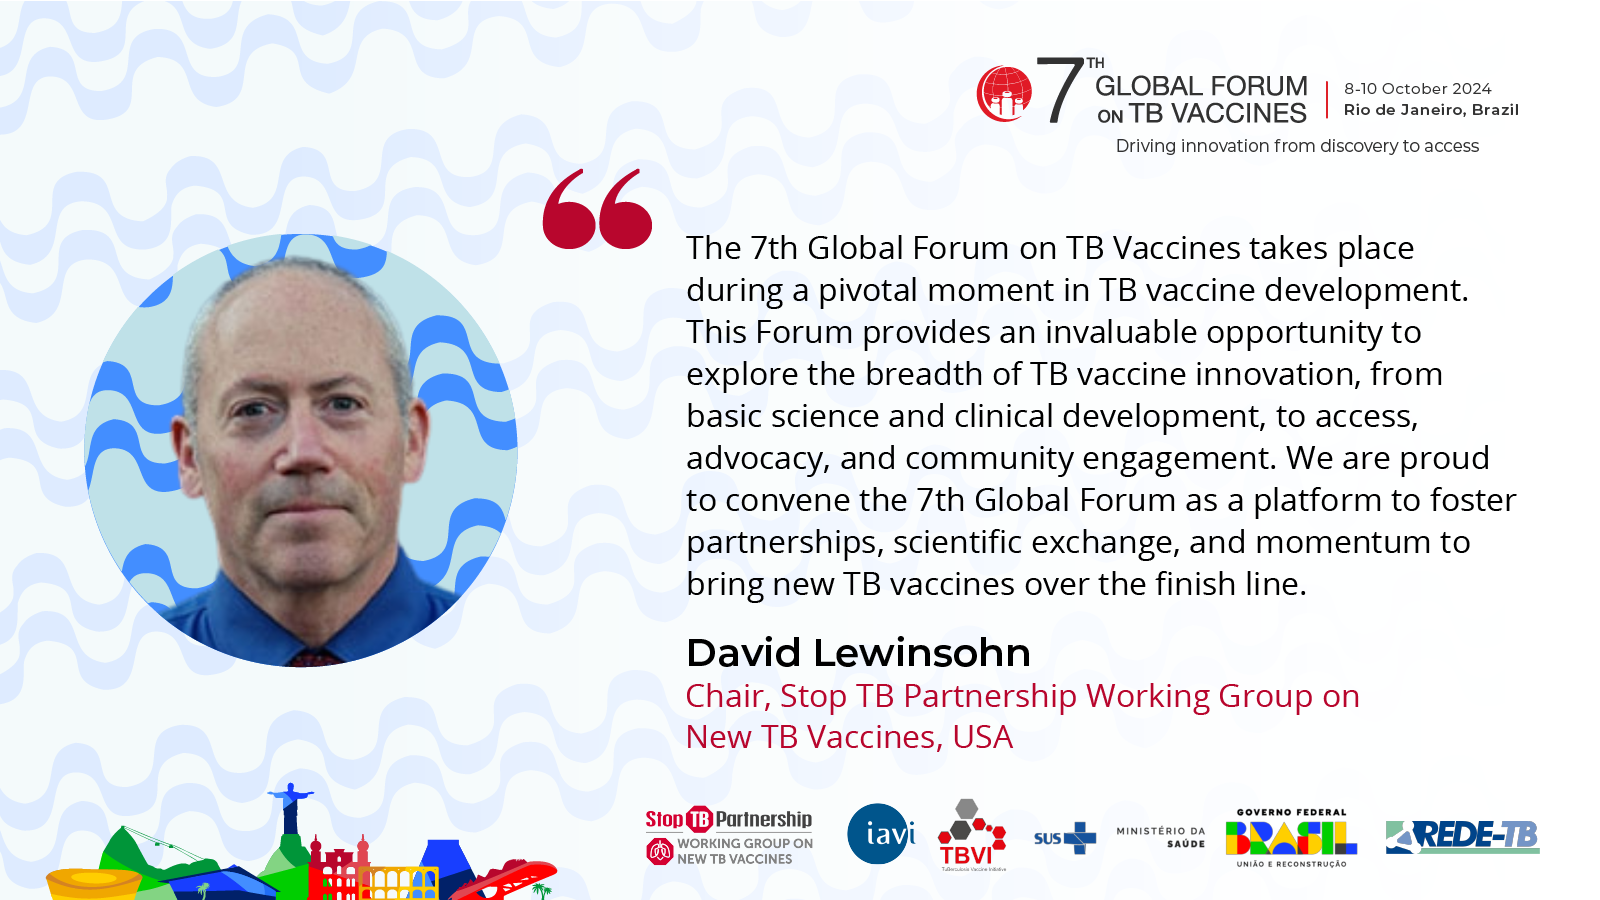 A graphic with a photo of Dr. David Lewinsohn, Chair, Stop TB Partnership Working Group on New TB Vaccines, co-chair of the 7th Global Forum on TB Vaccine with a quote reading: “The 7th Global Forum on TB Vaccines takes place during a pivotal moment in TB vaccine development. This Forum provides an invaluable opportunity to explore the breadth of TB vaccine innovation, from basic science and clinical development, to access, advocacy, and community engagement. We are proud to convene the 7th Global Forum as a platform to foster partnerships, scientific exchange, and momentum to bring new TB vaccines over the finish line.”